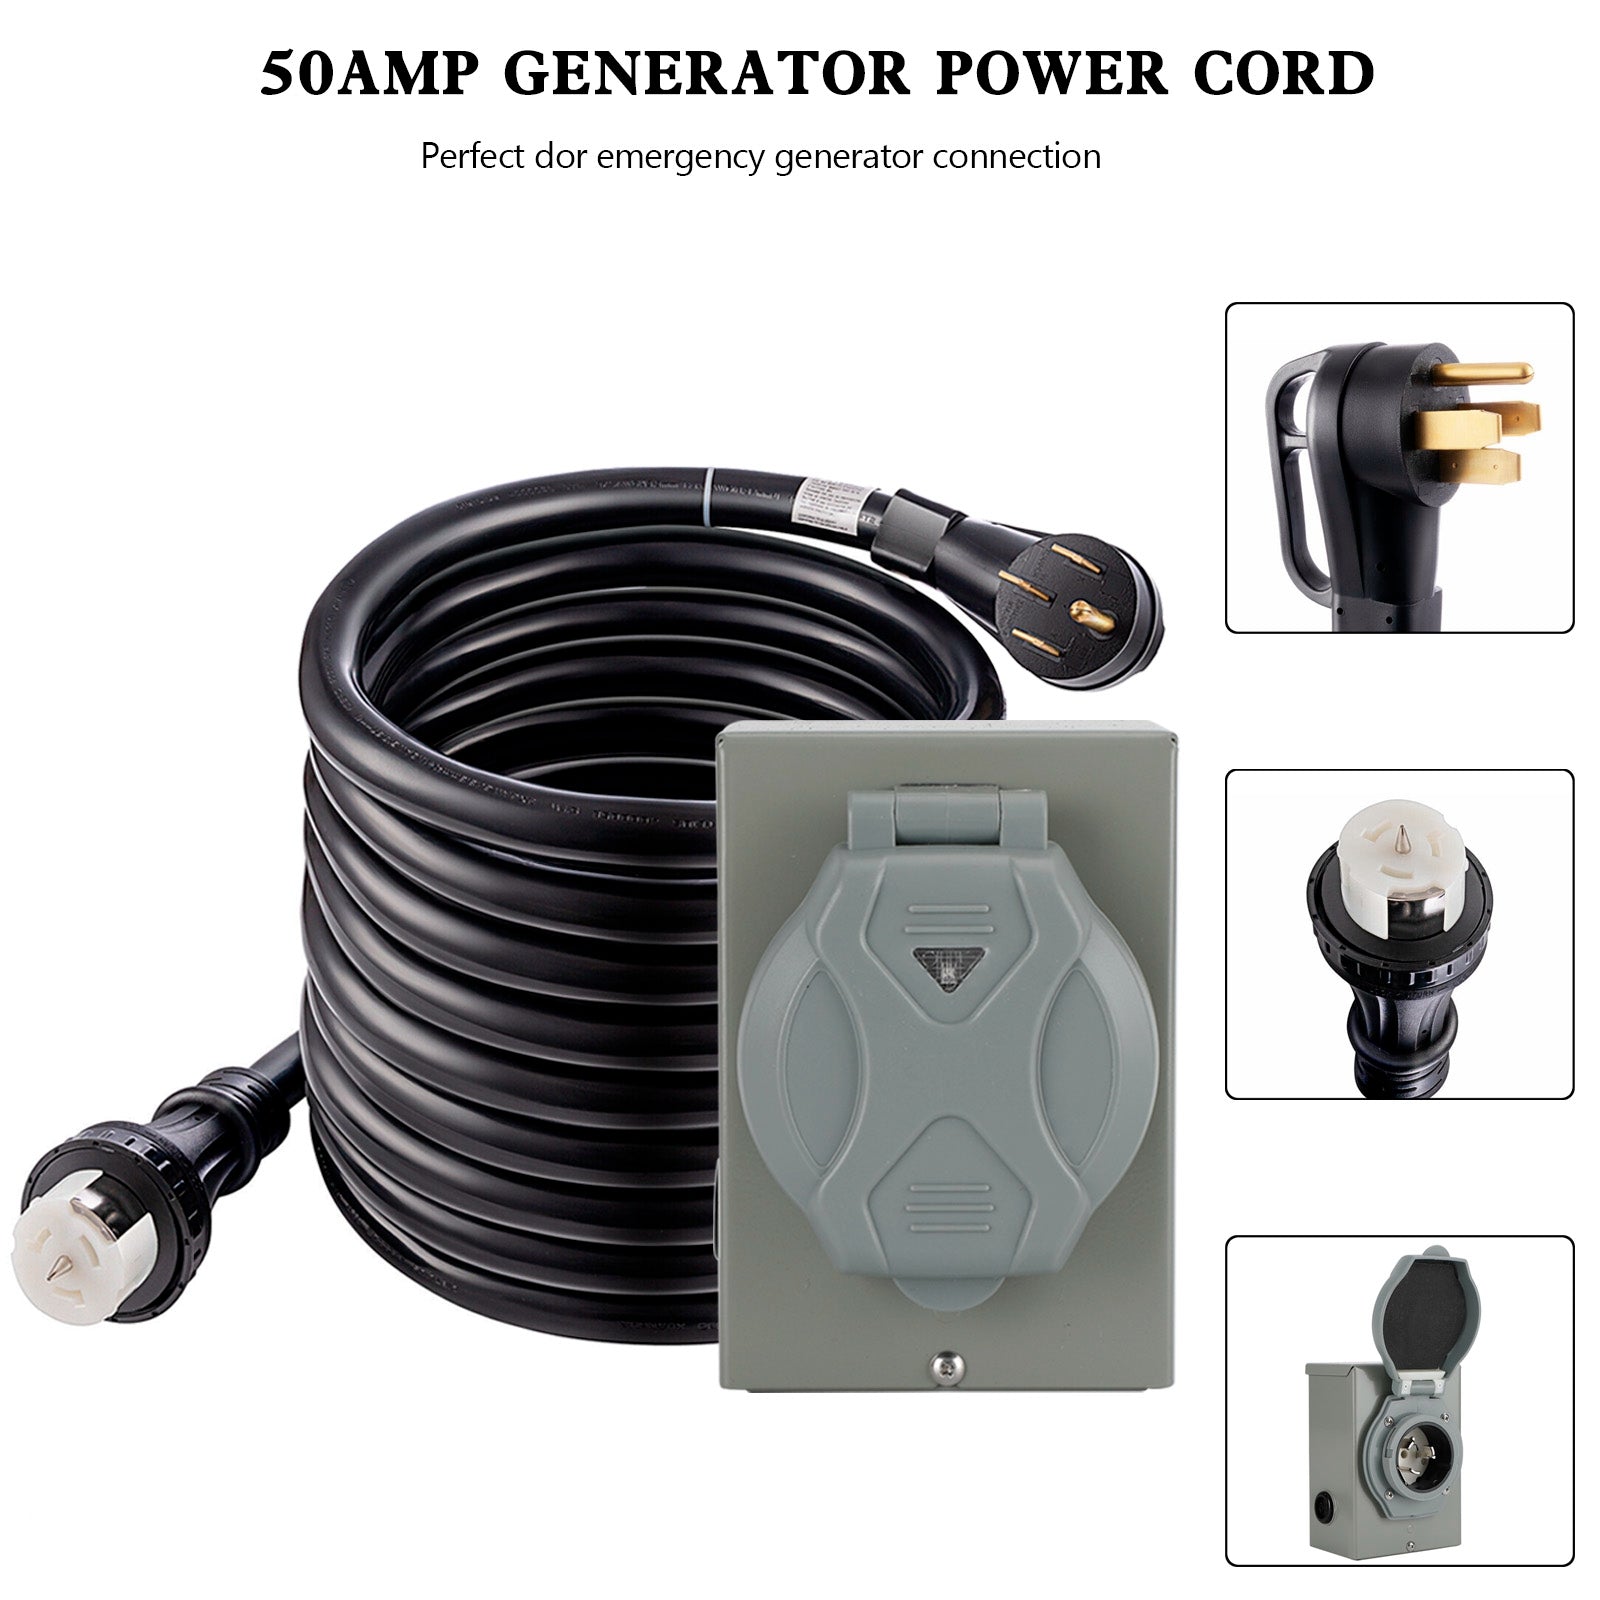 50Amp Generator Cord 25FT+Power Inlet Box RV Extension Cord Waterproof Combo Kit - 0